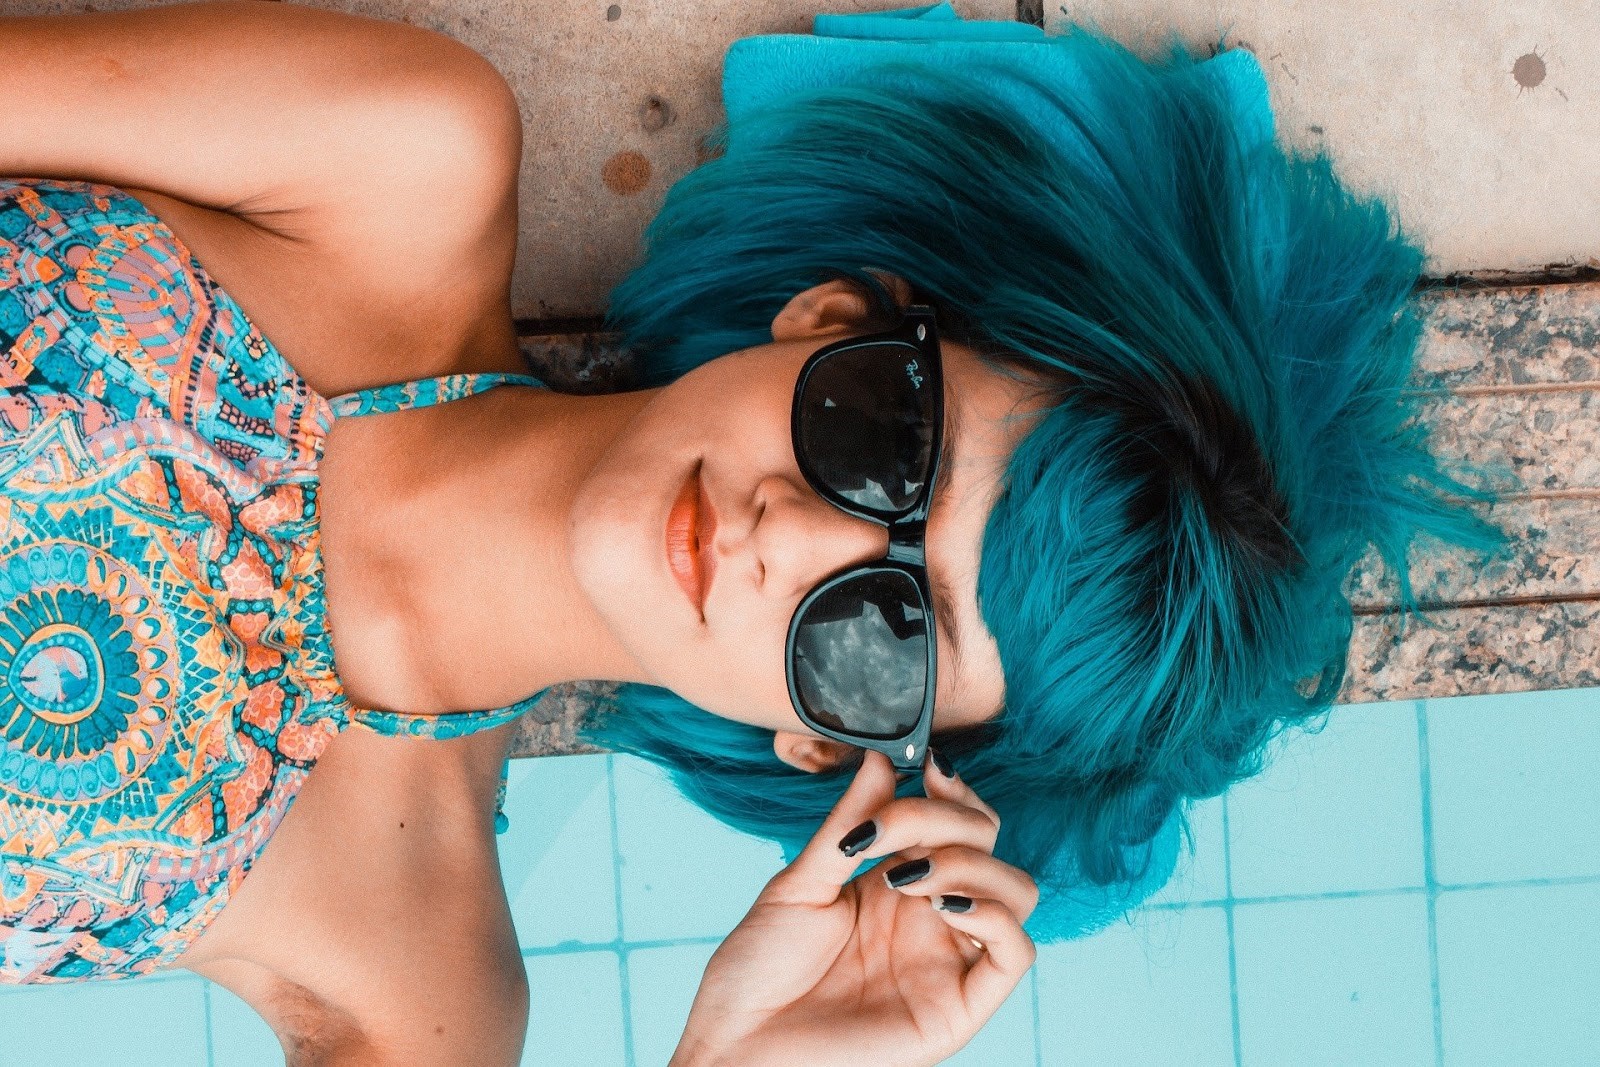 Woman with bluish-green hair wearing sunglasses on a beach